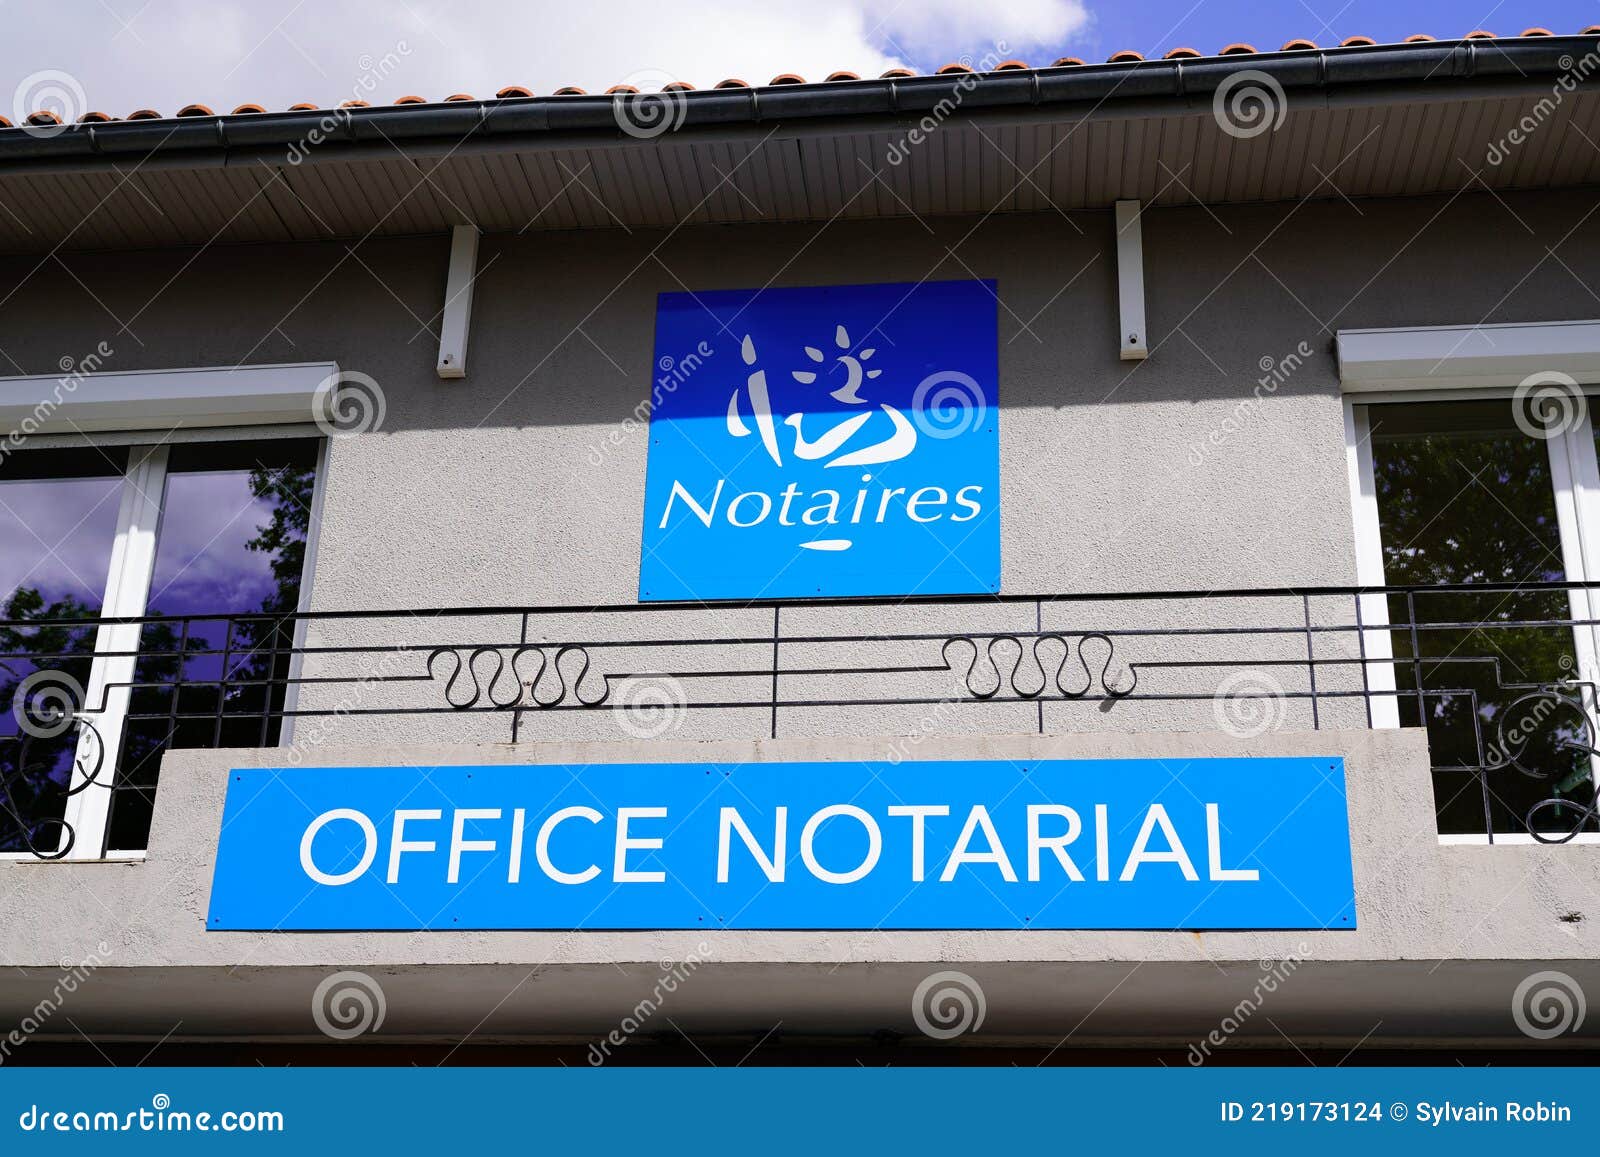 notaire office notarial label french text sign and brand logo front of wall notary